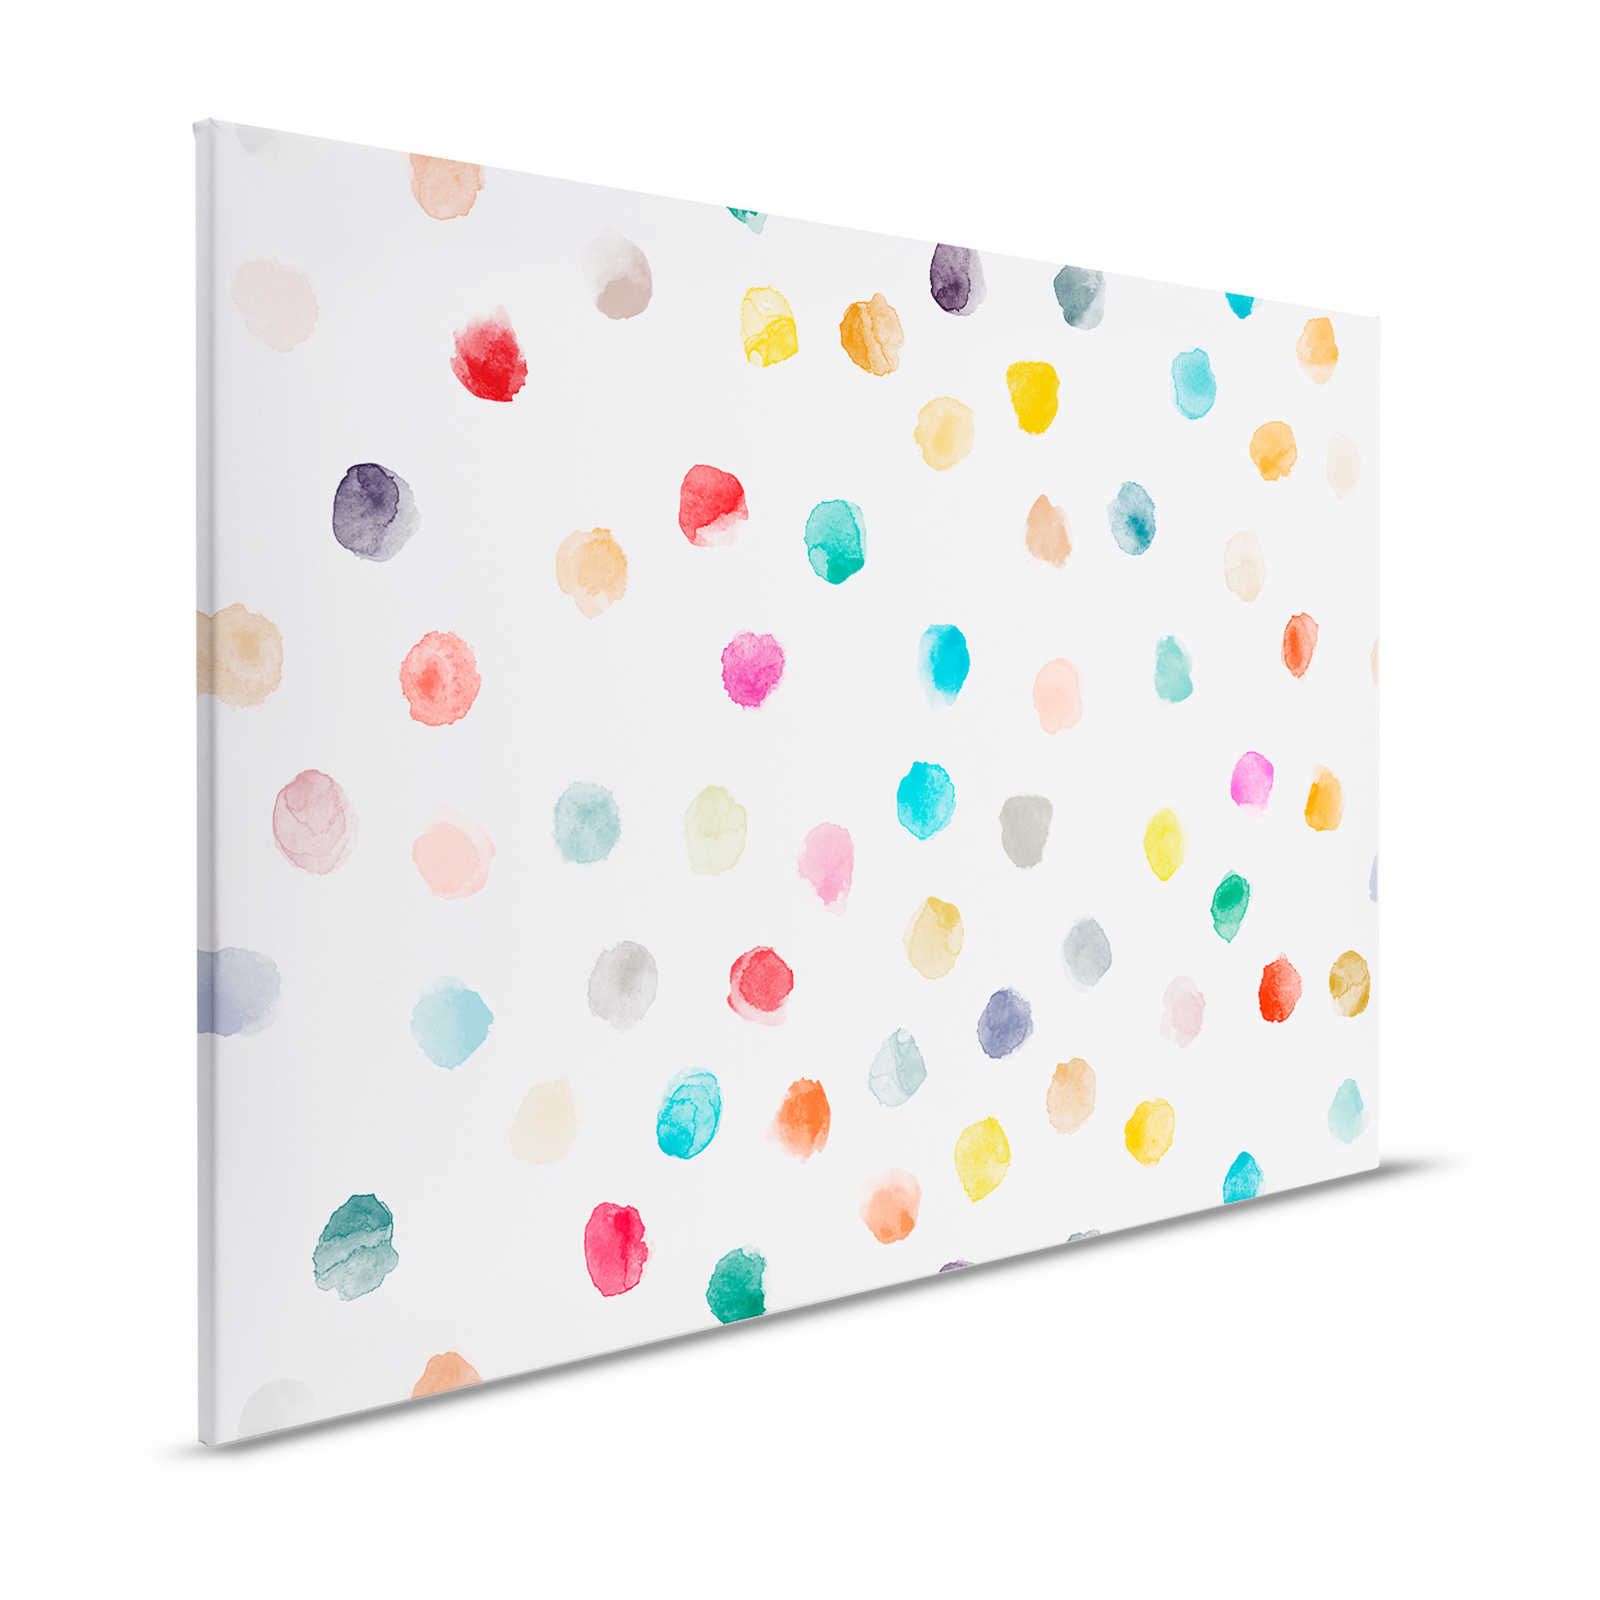 Canvas for children's room with colourful dots - 120 cm x 80 cm
